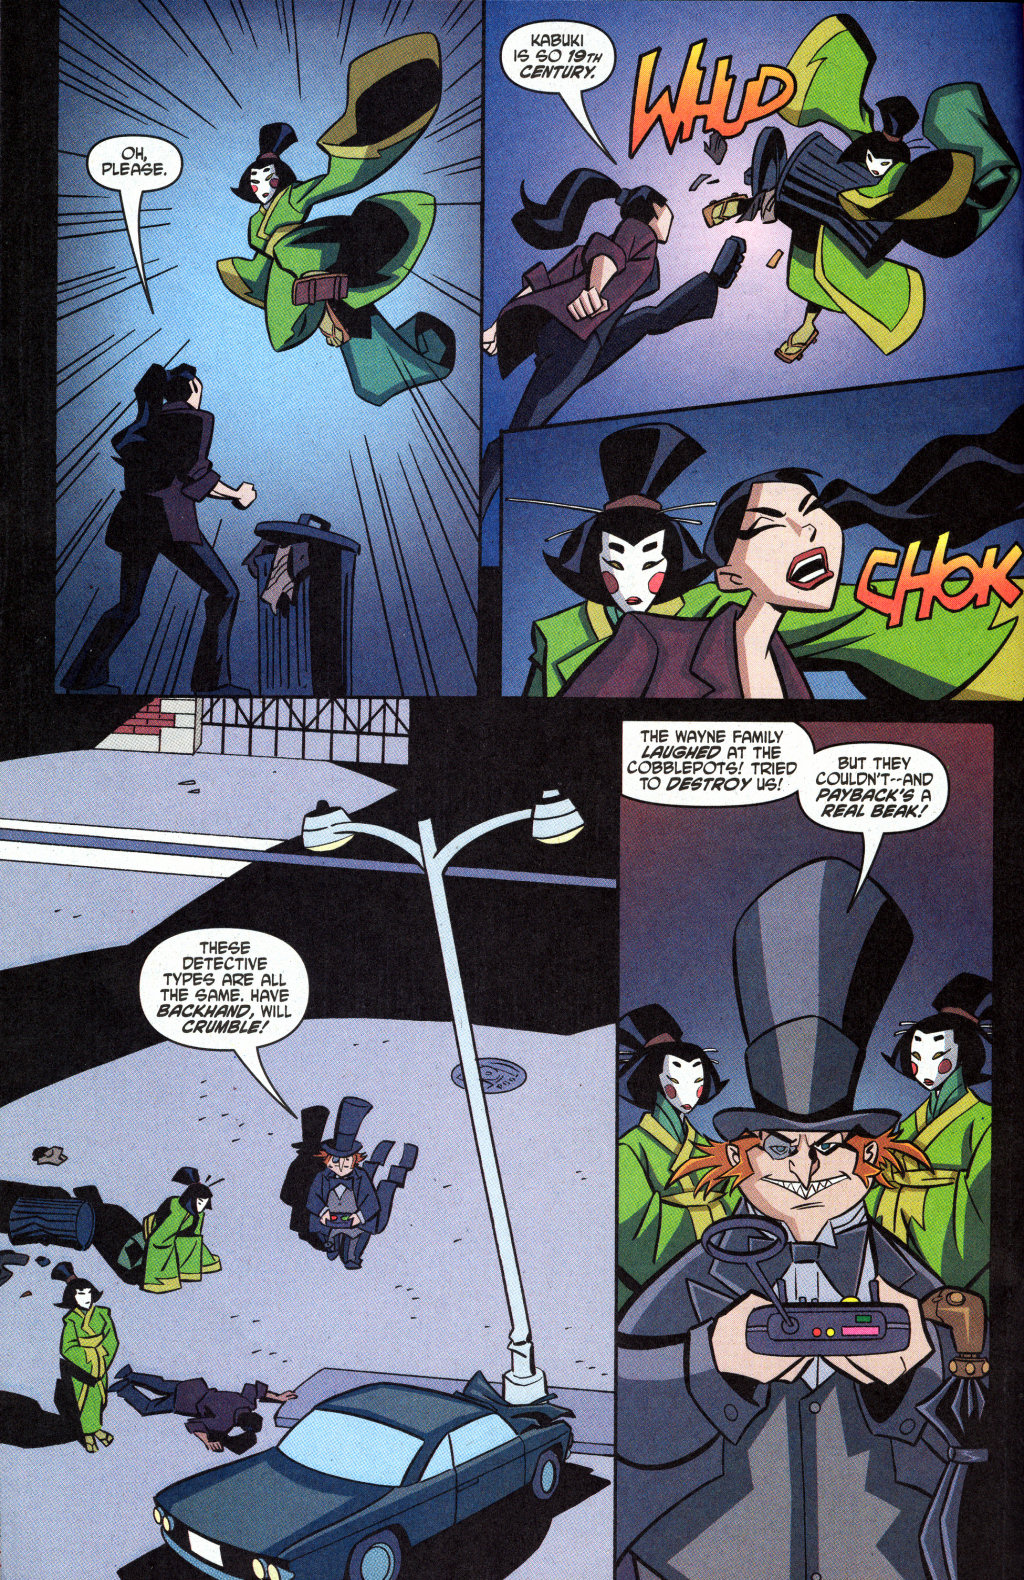 The Batman Strikes! issue 1 (Burger King Giveaway Edition) - Page 22